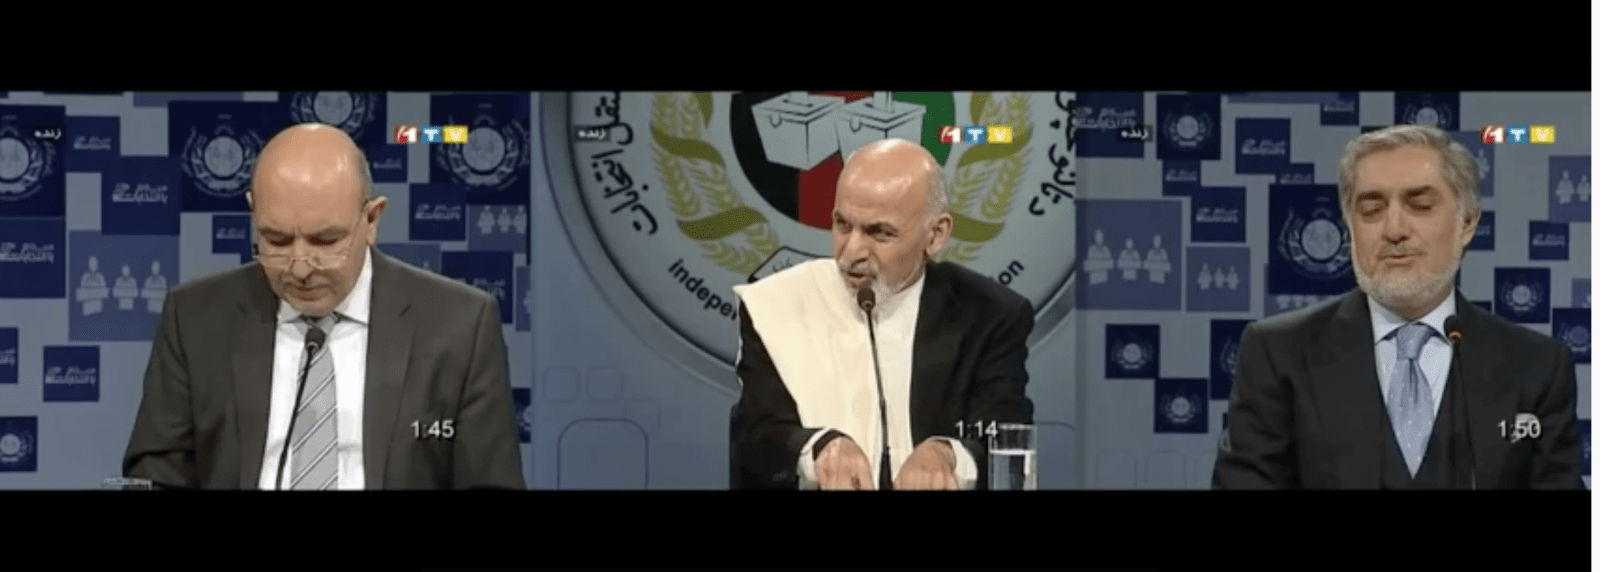 Afghan Election Conundrum and the Peace Process